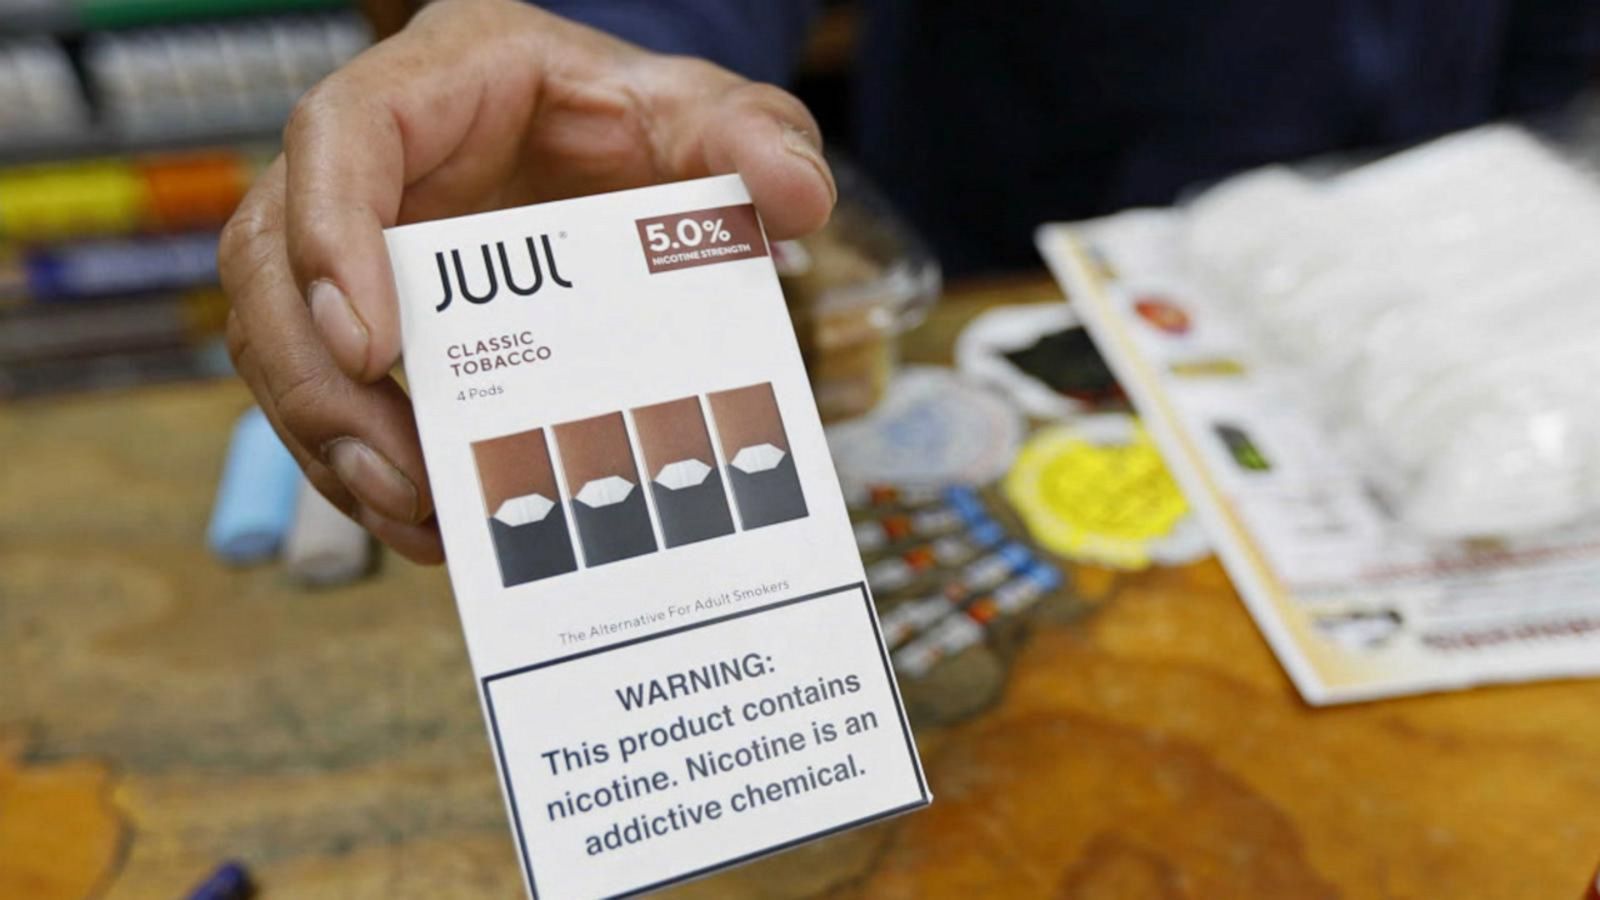 VIDEO: FDA could pull Juul e-cigarette products off shelves: Report